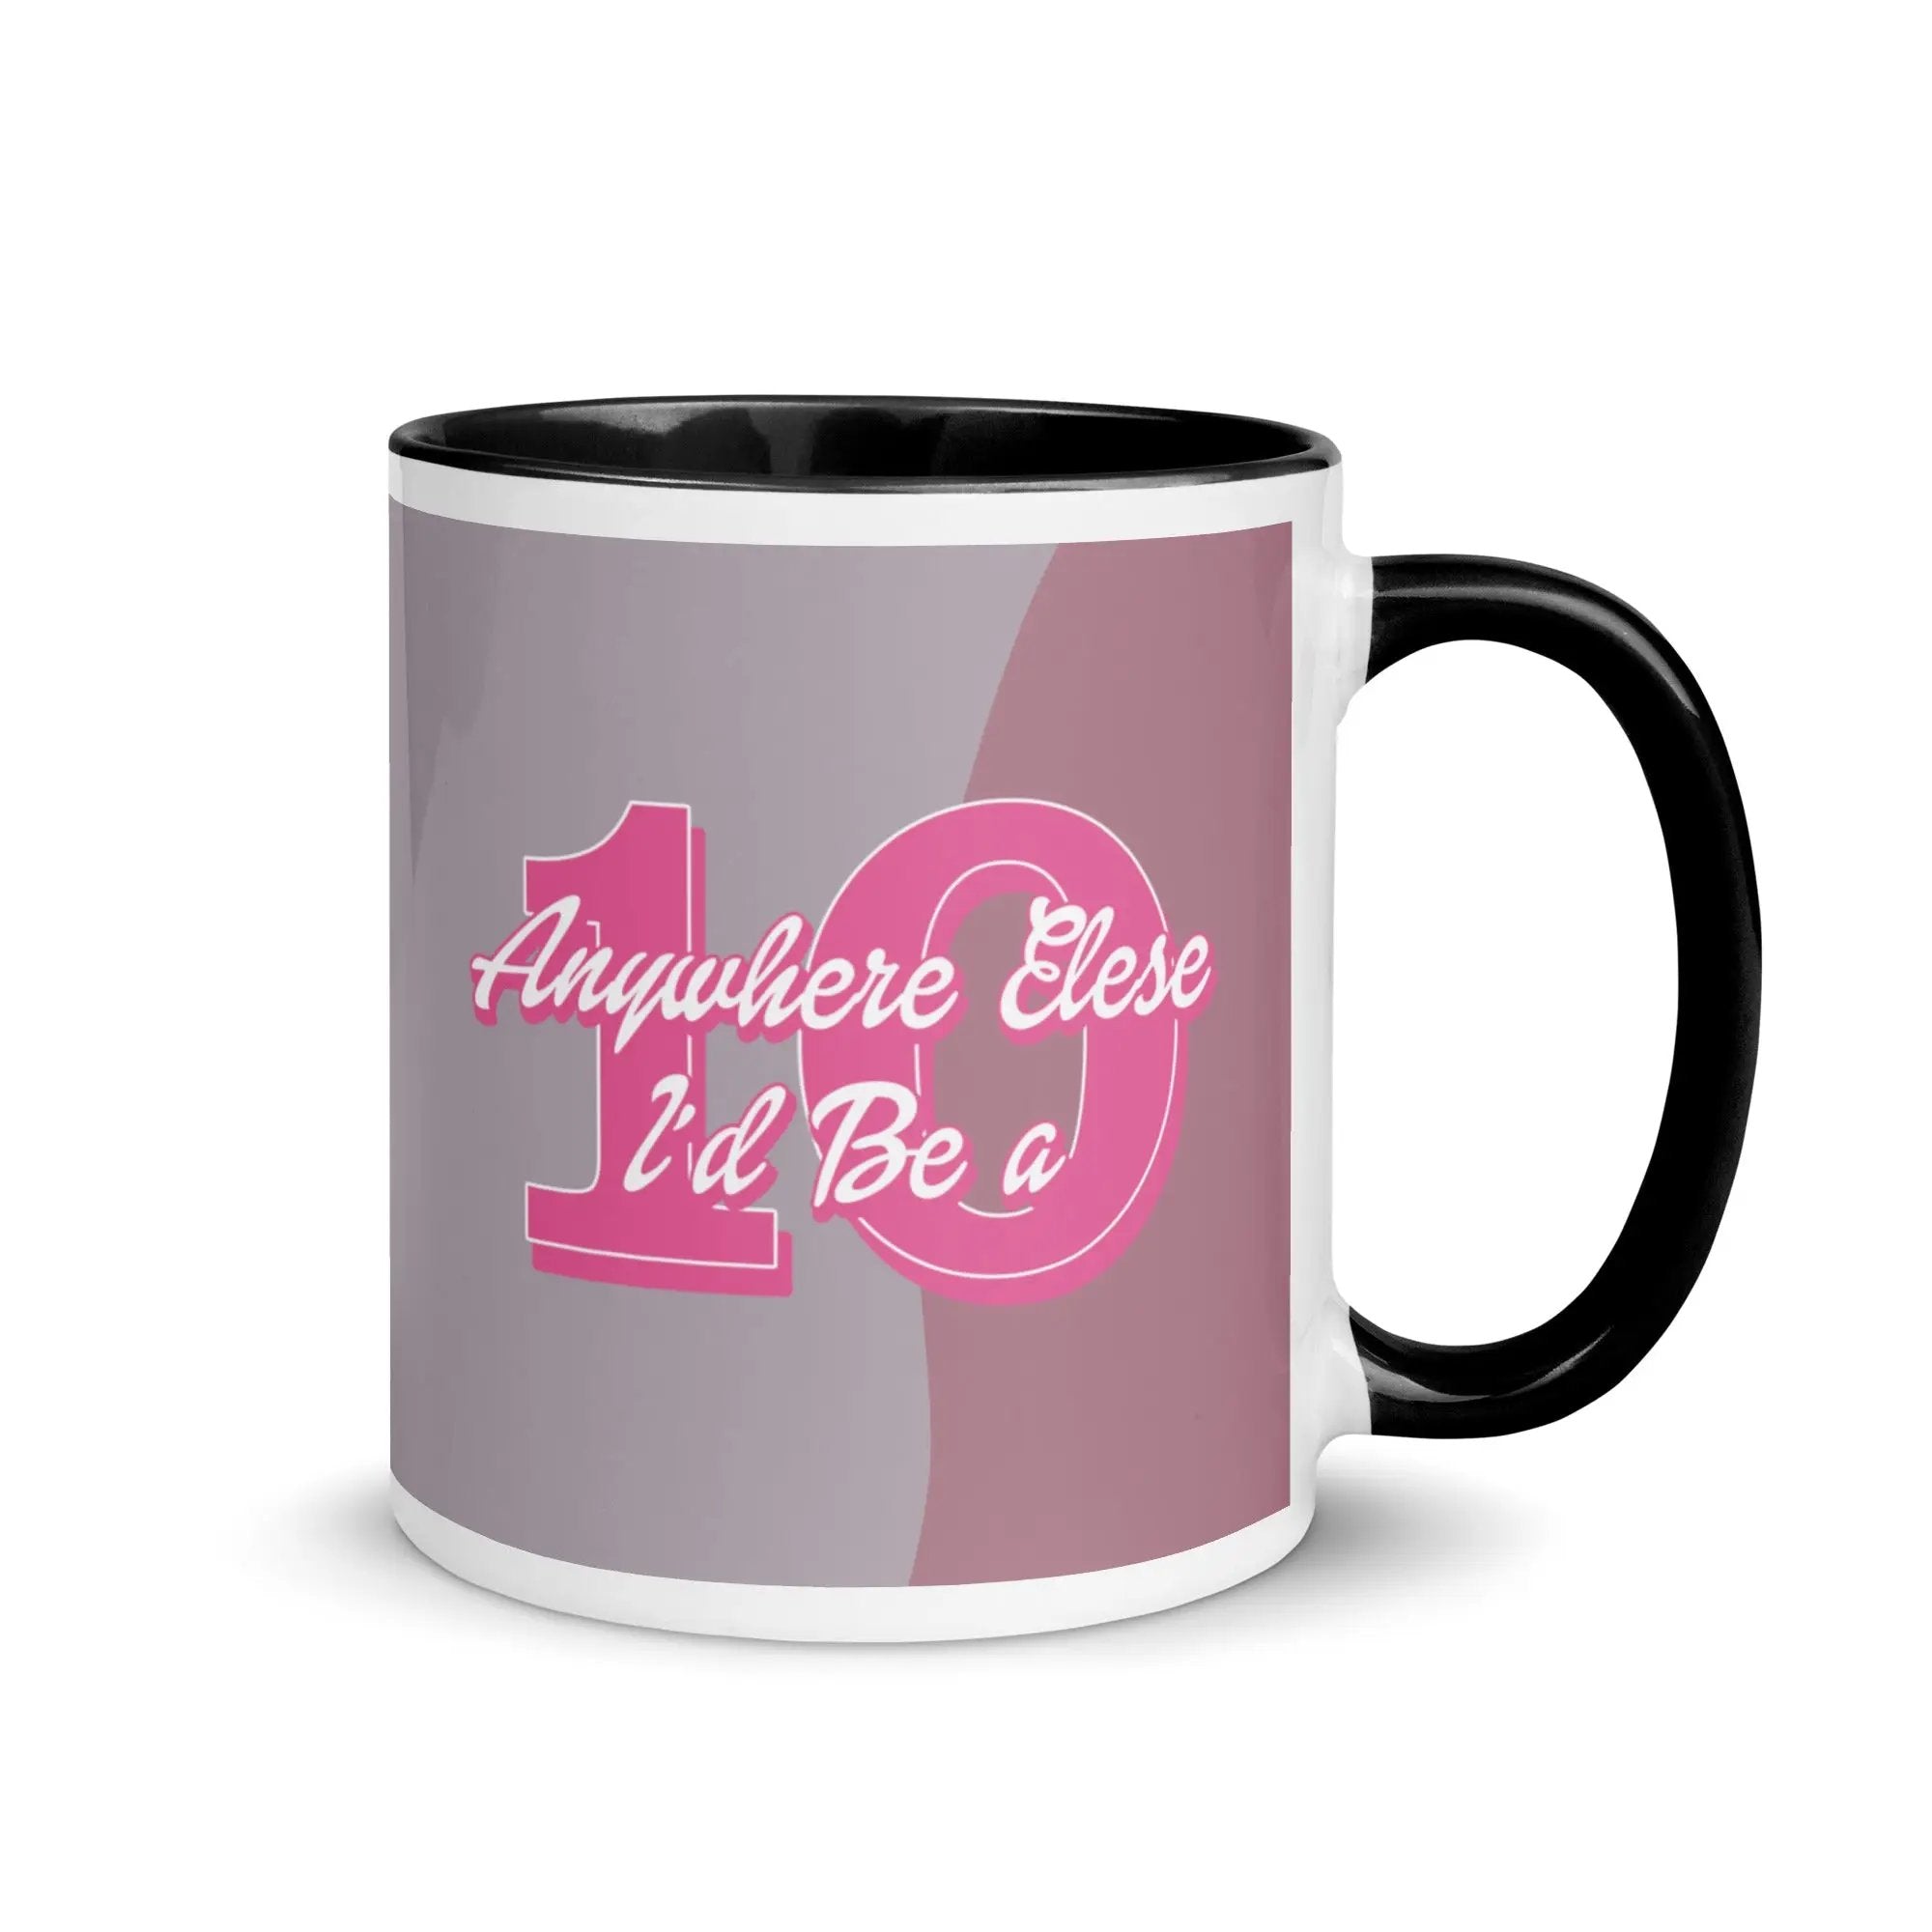 a black and white coffee mug with pink lettering